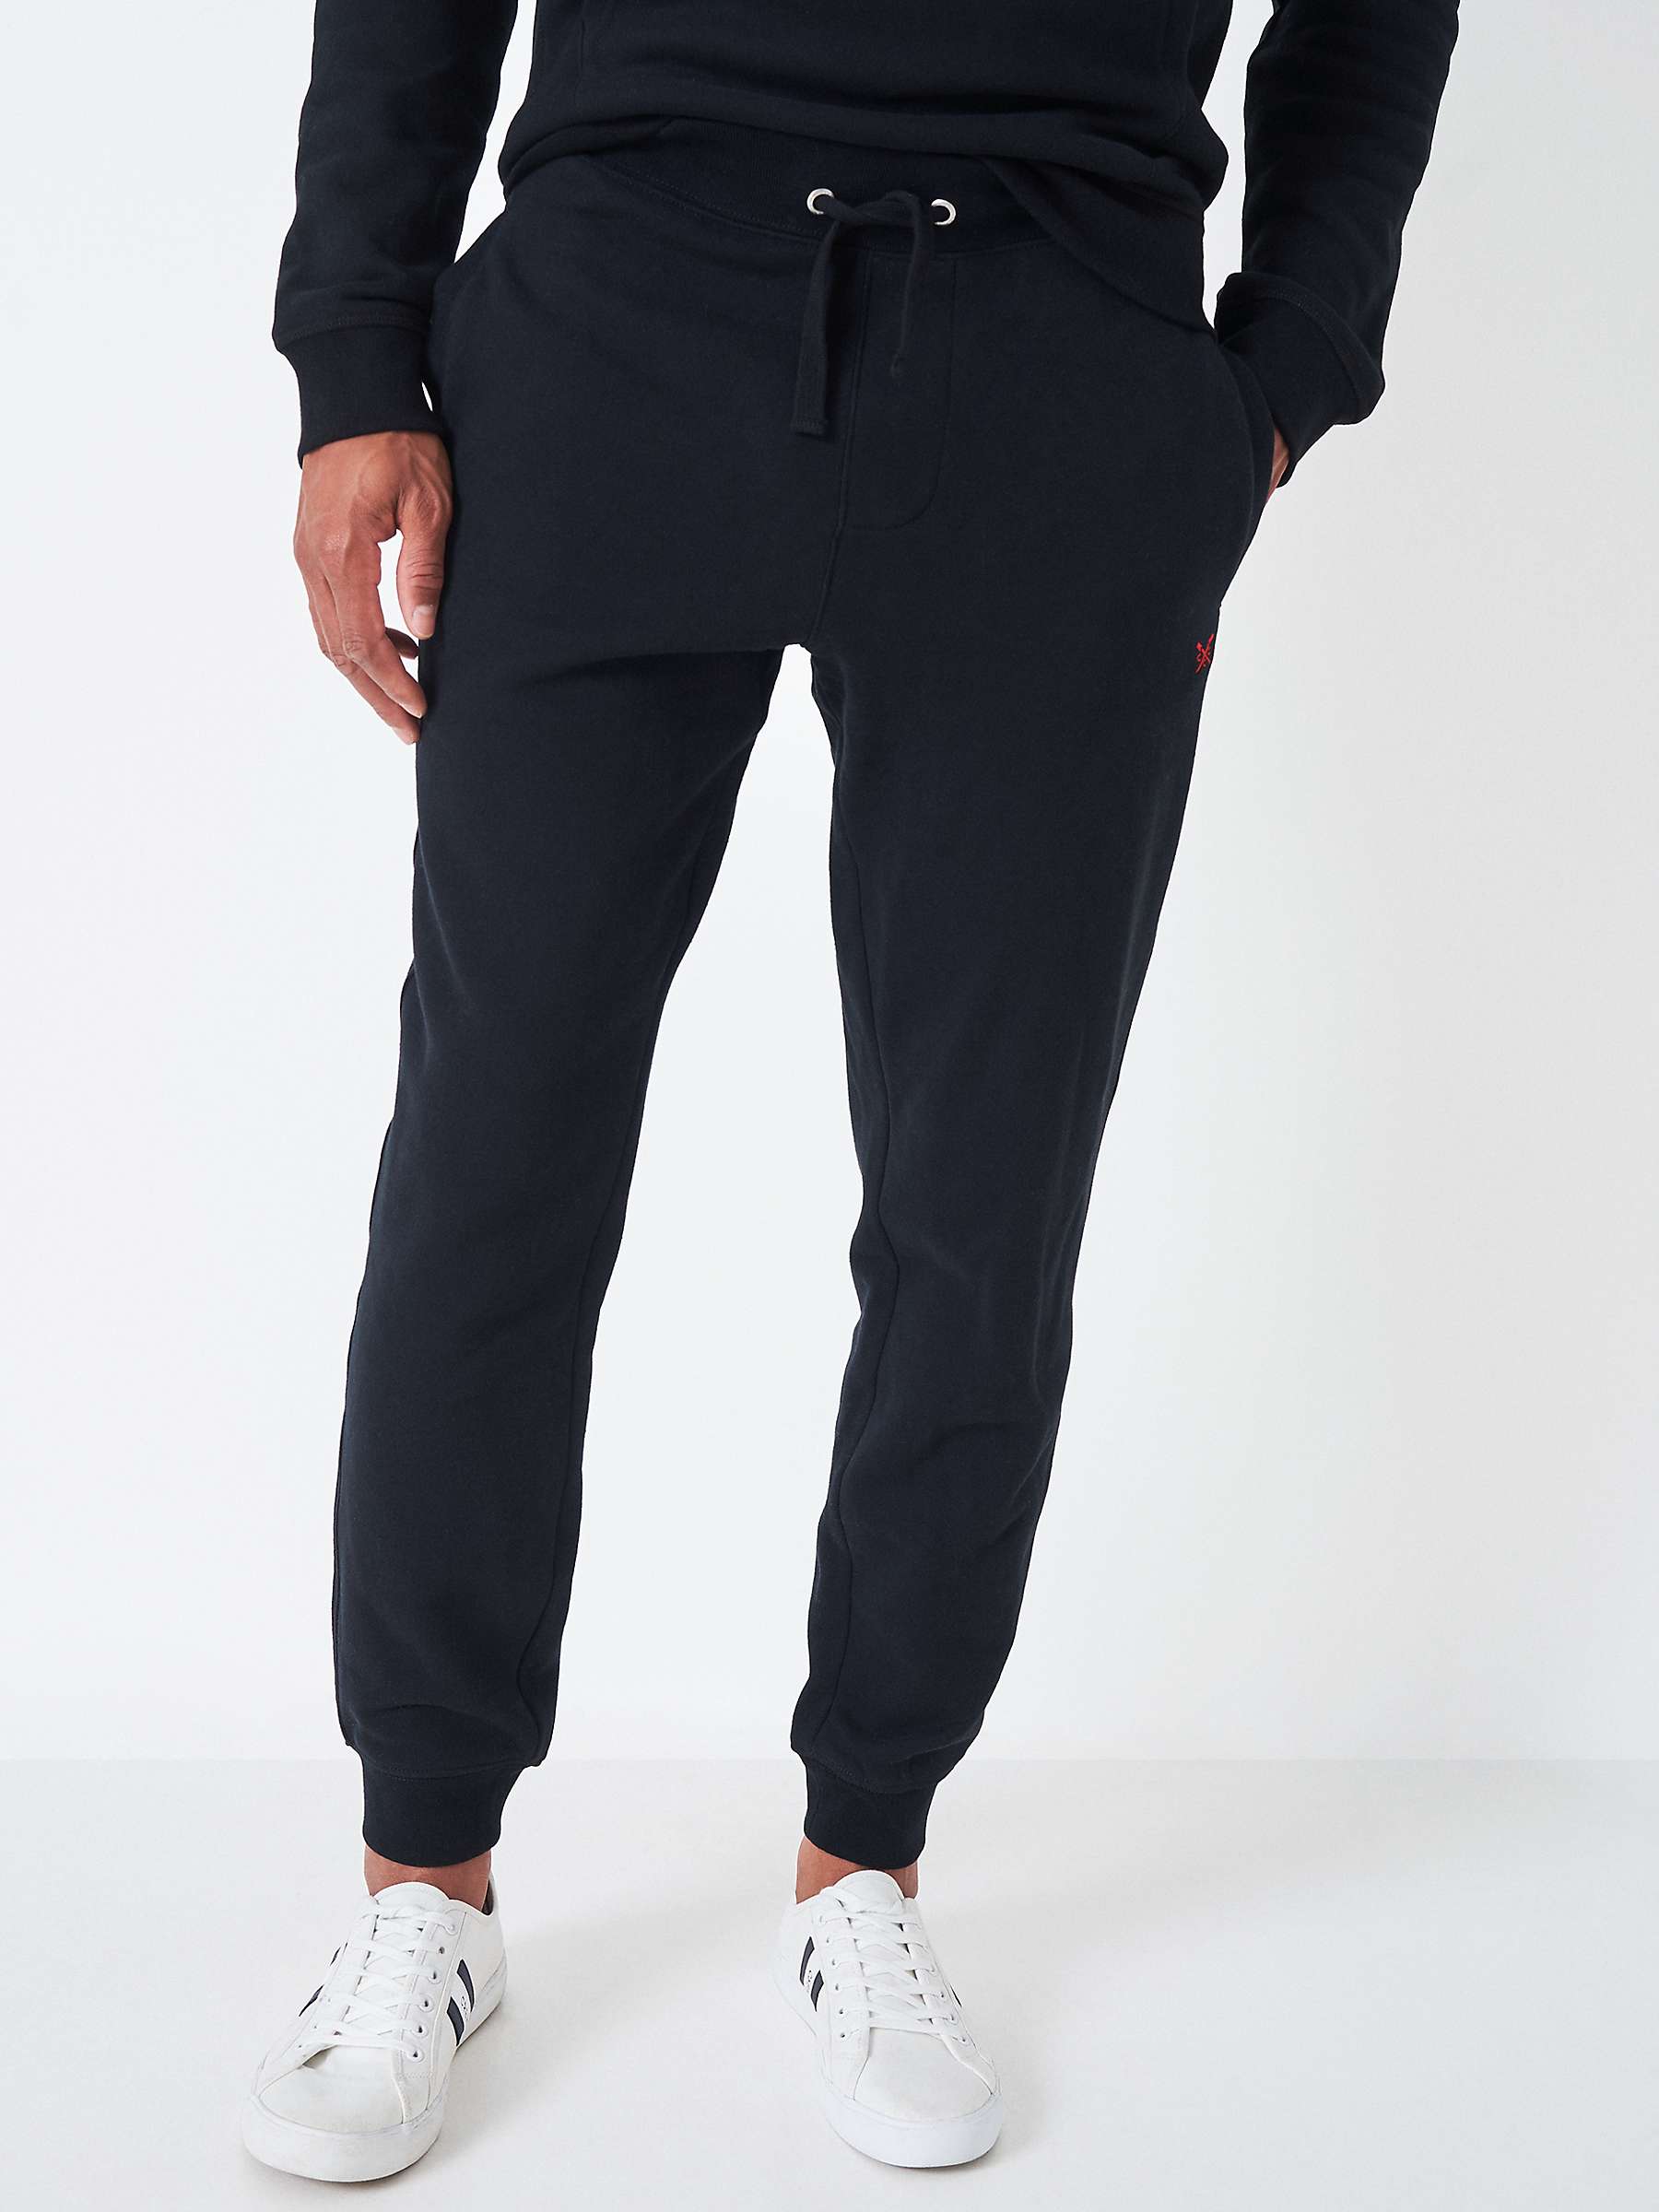 Buy Crew Clothing Crossed Oars Cotton Blend Joggers Online at johnlewis.com